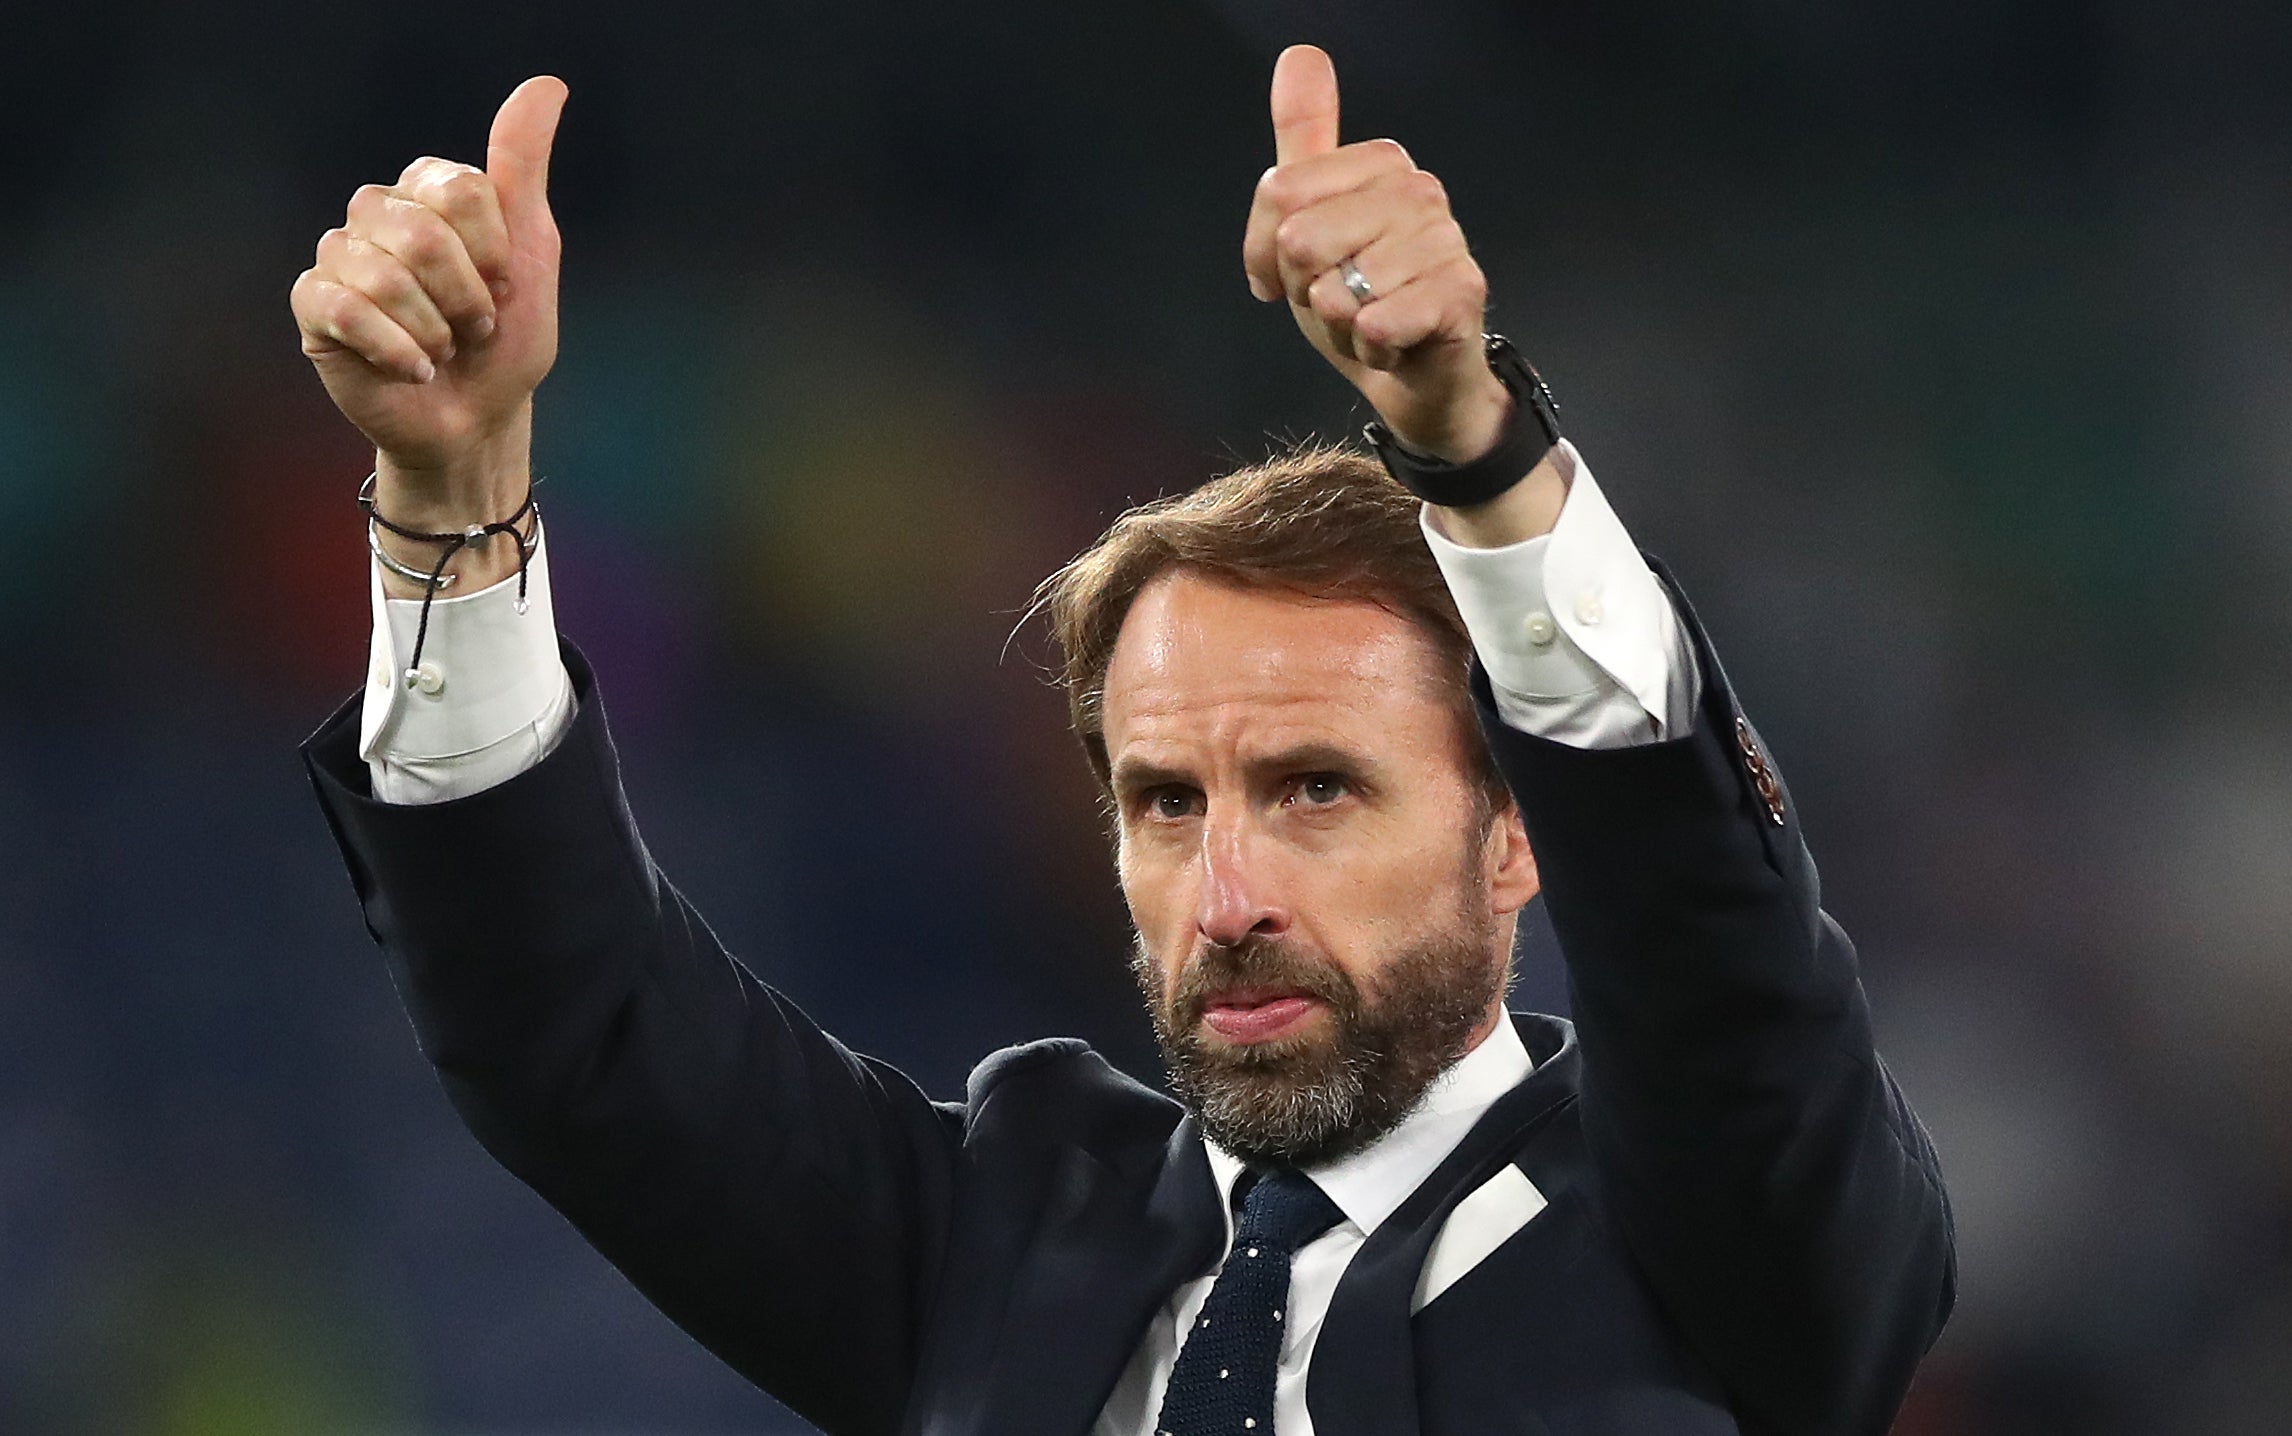 England manager Gareth Southgate is hoping to win Euro 2020 for the whole country